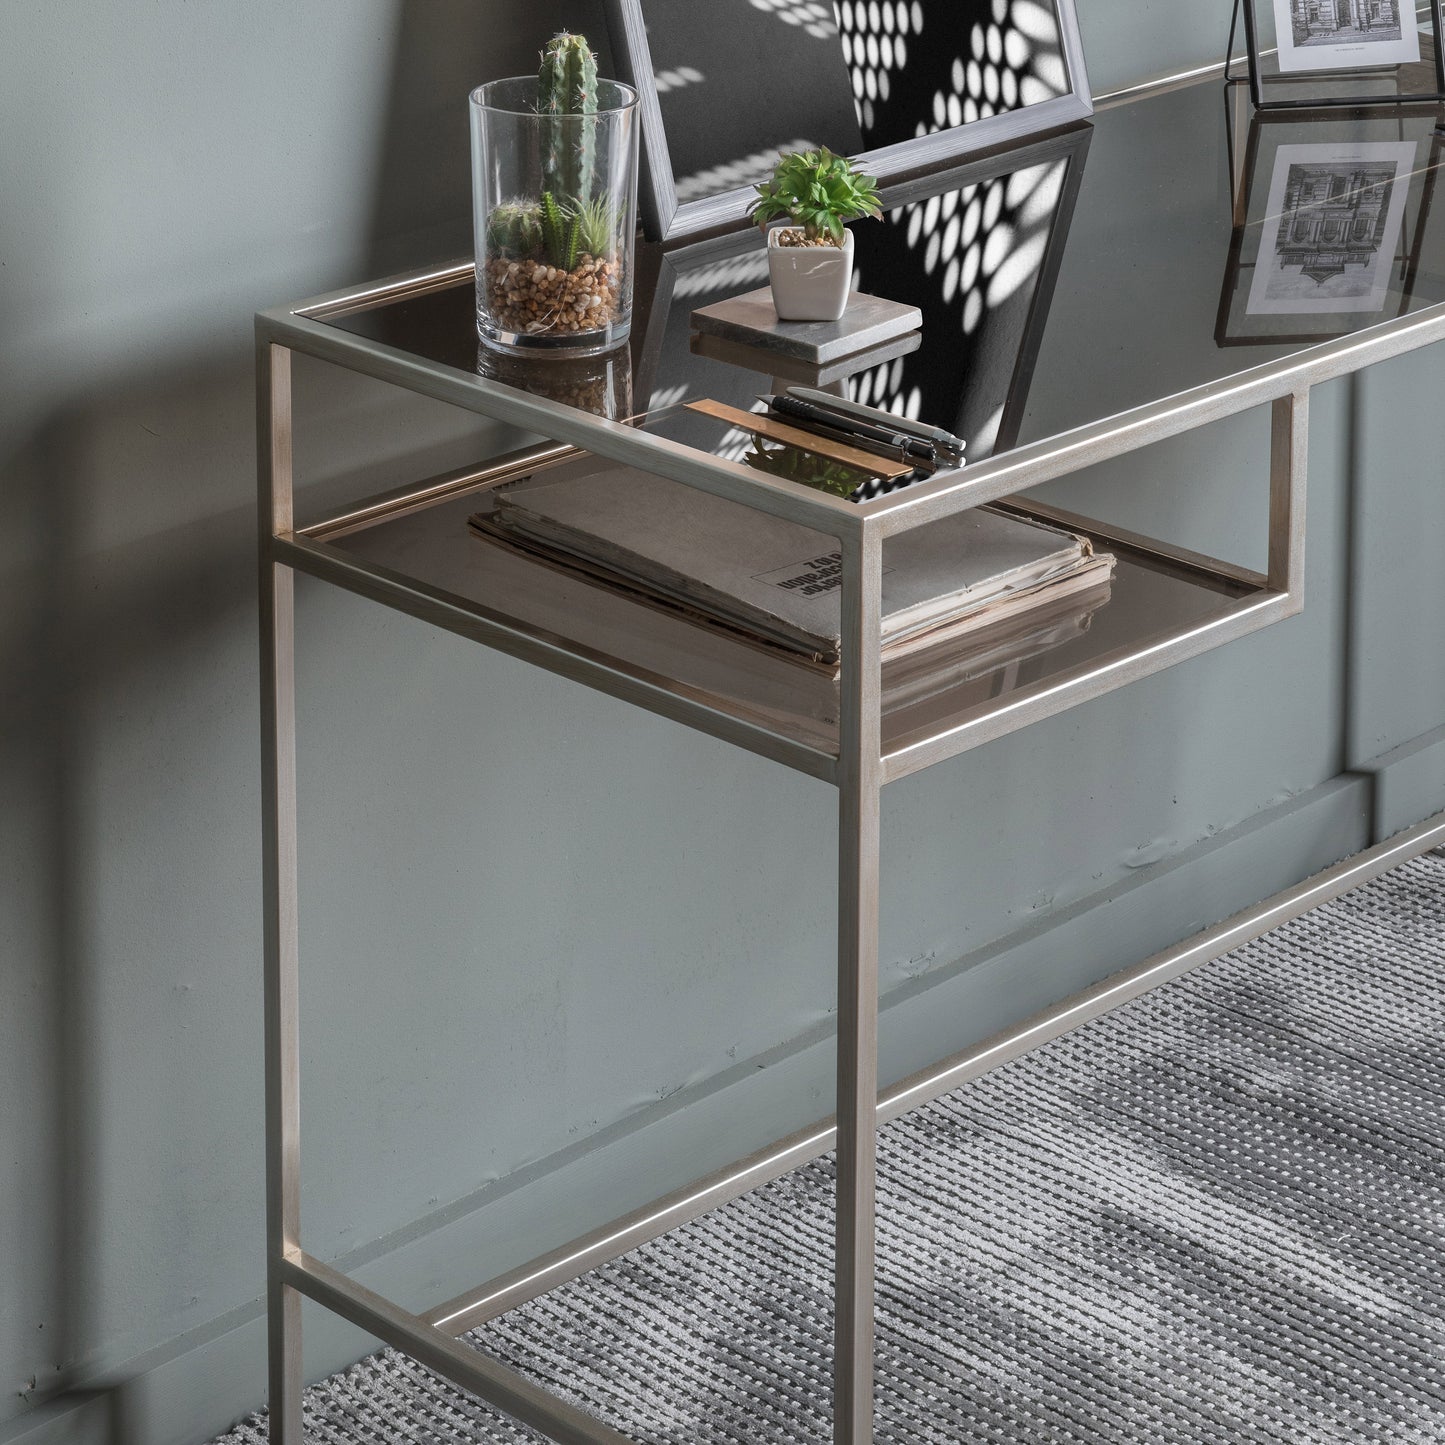 An Engleborne Desk Silver 1300x500x760mm with a glass top and a cactus, perfect for home furniture and interior decor.